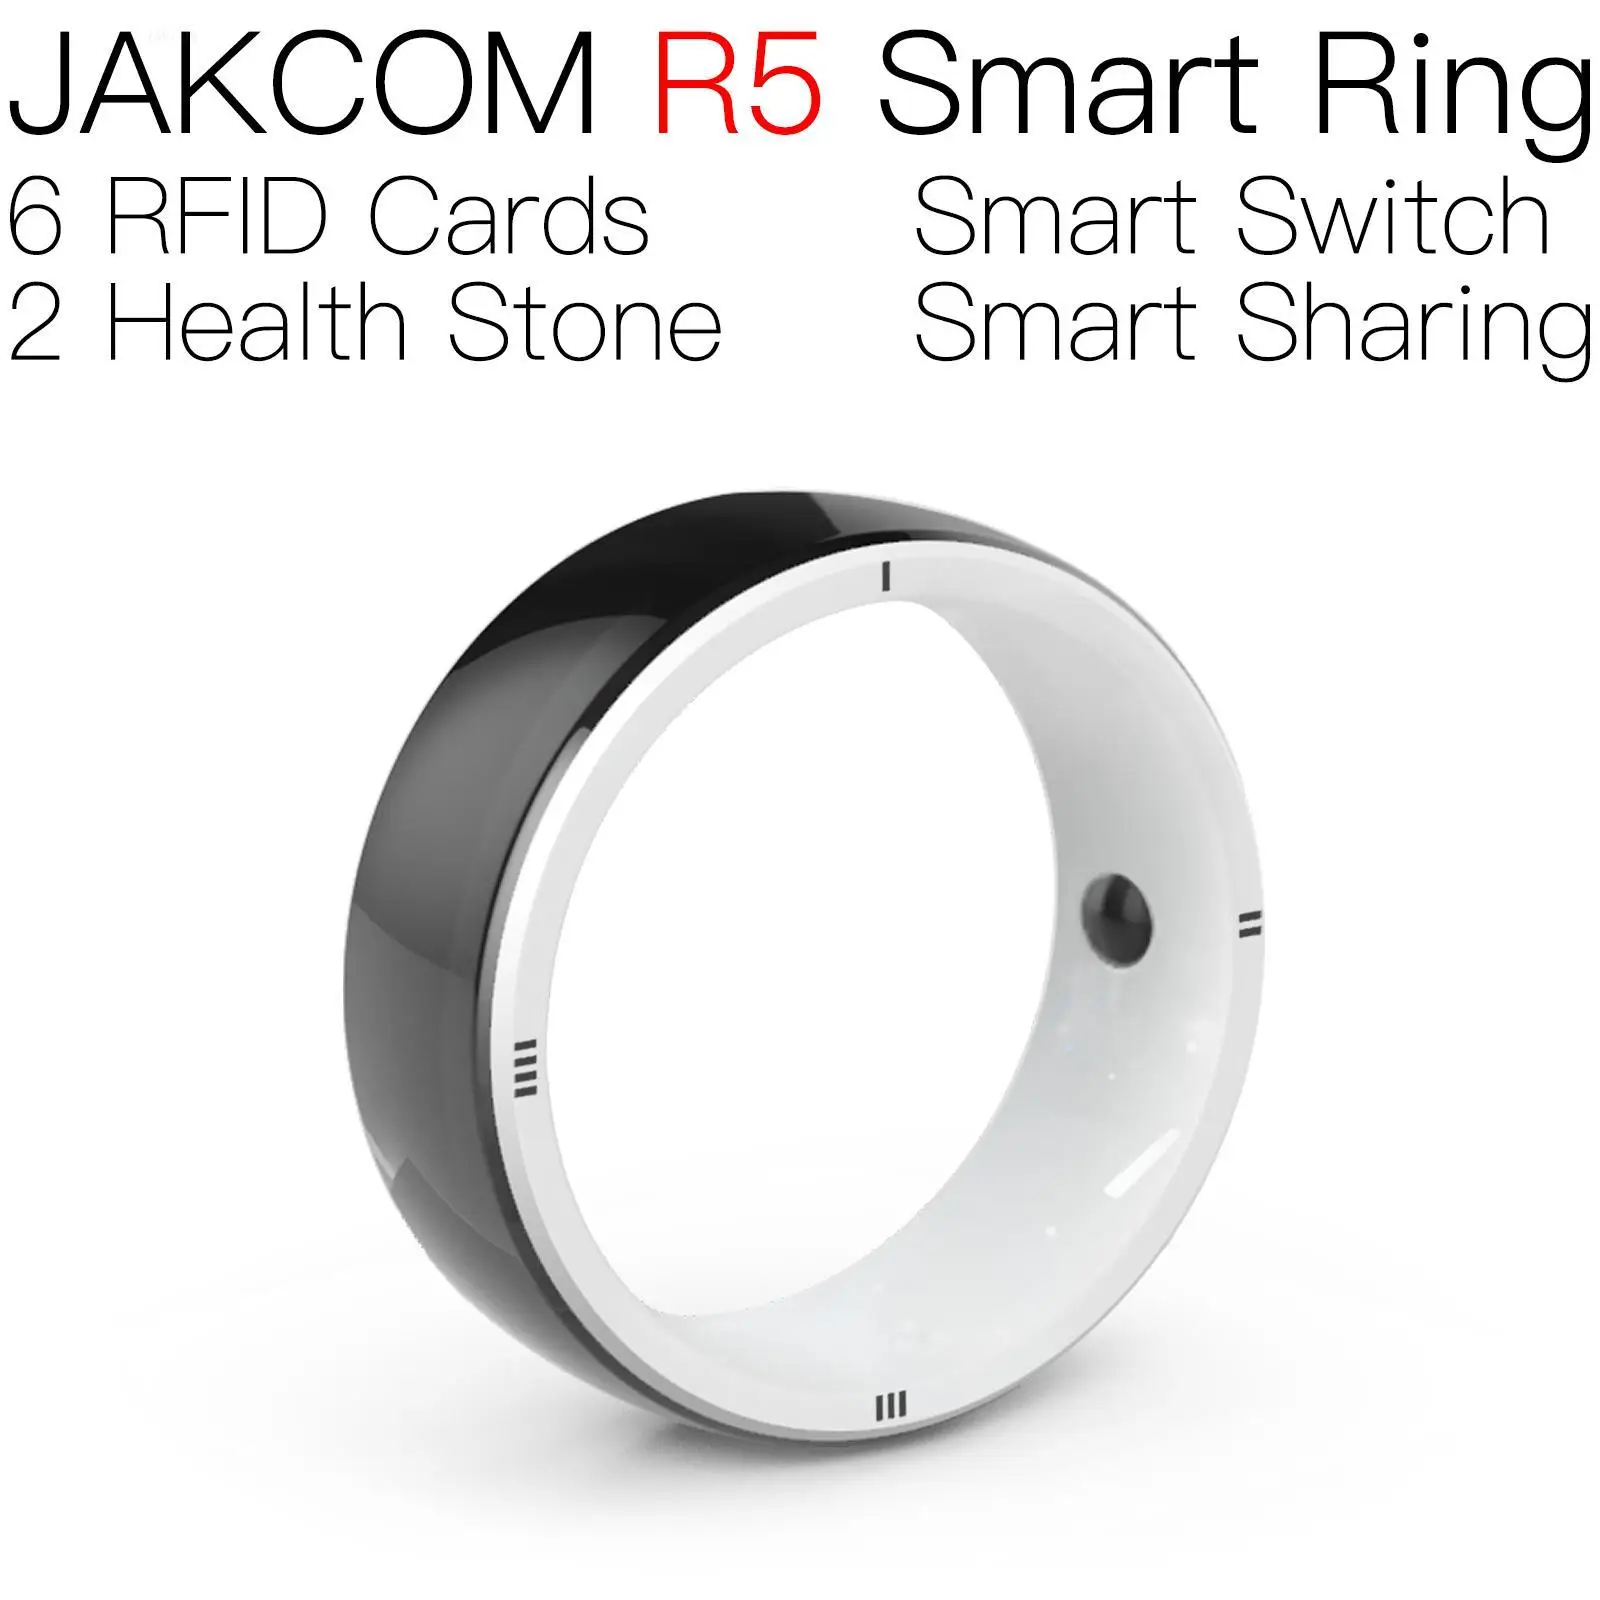 

JAKCOM R5 Smart Ring better than id chip iso rfid reader keychain tag 8mm microchip printable labels stickers blank card mobile